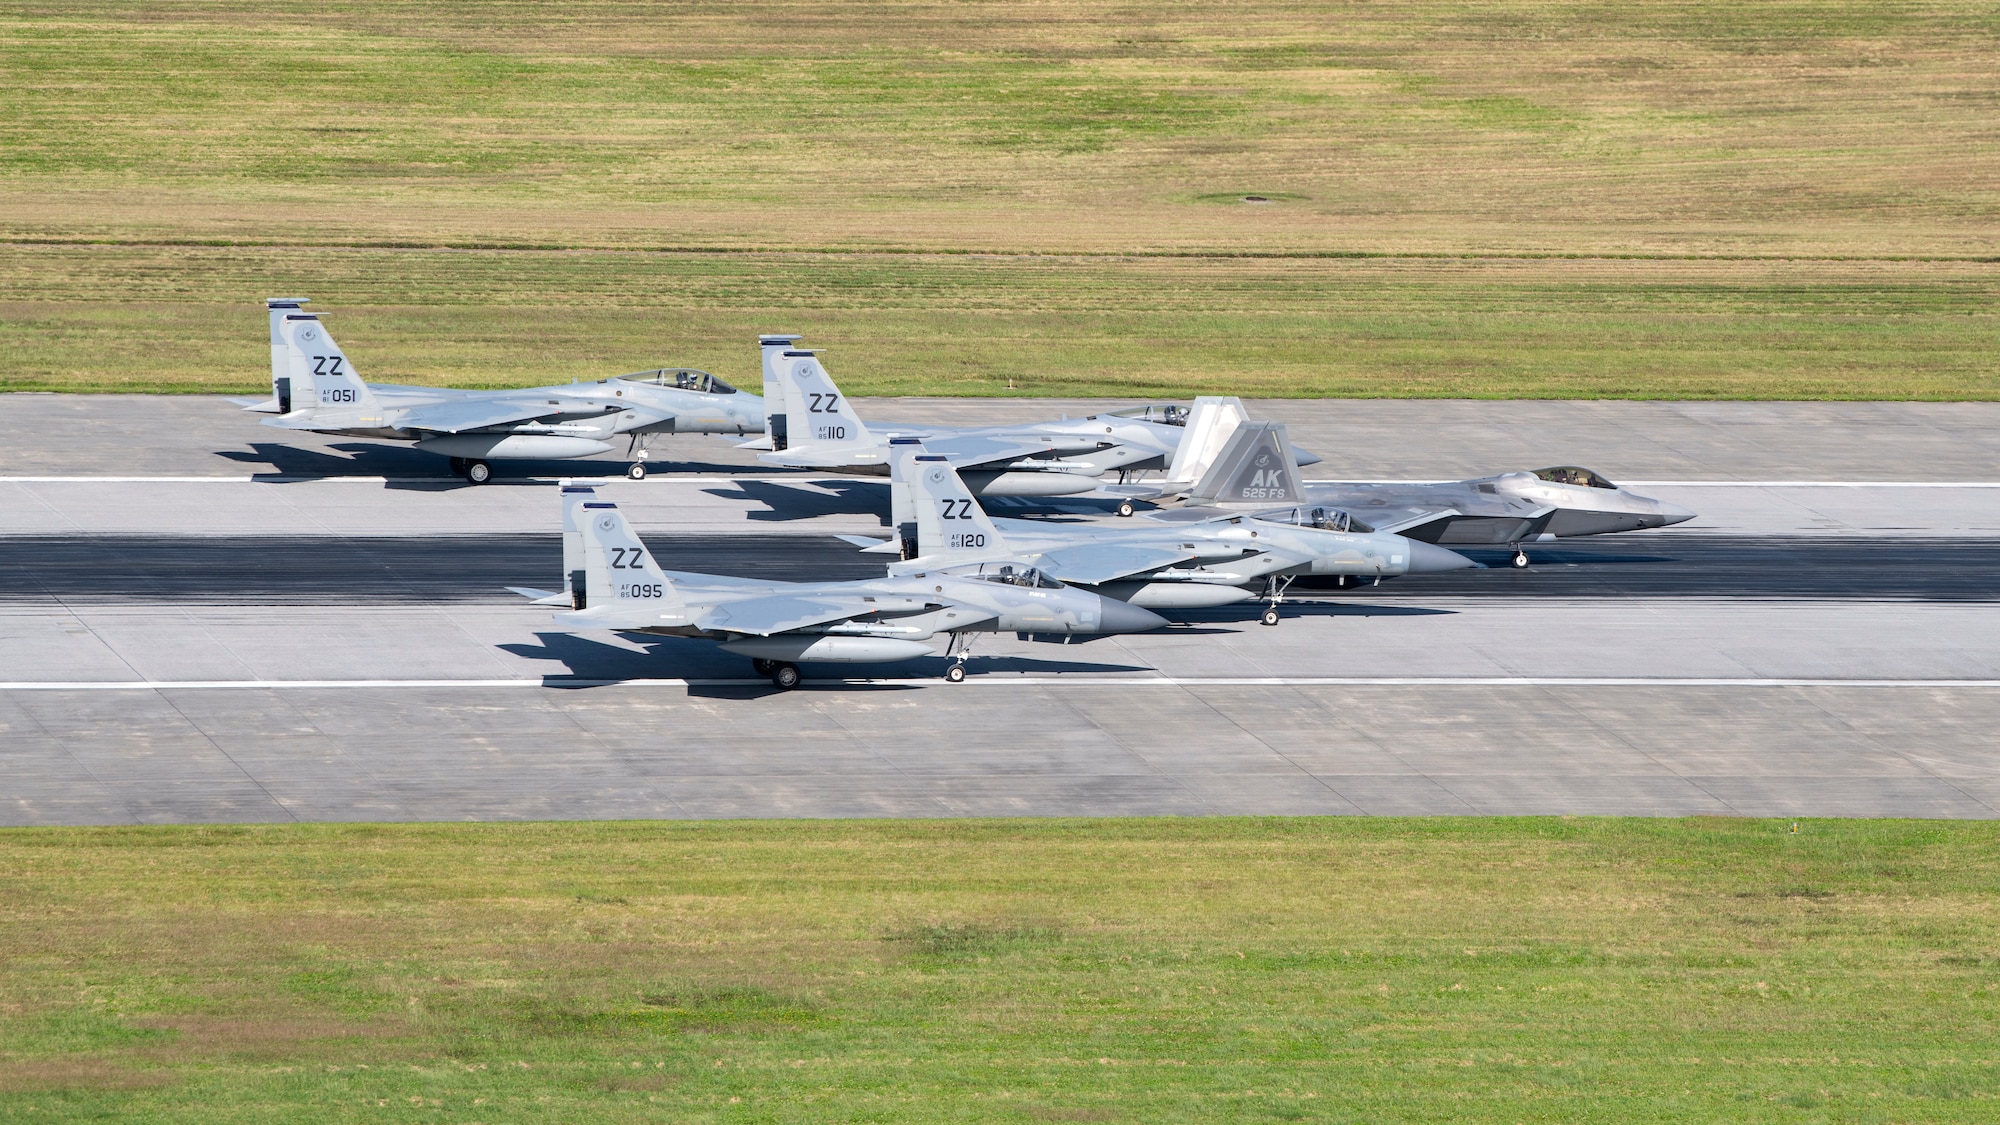 A formation of 44th Fighter Squadron F-15C Eagles and a 525th FS F-22A Raptor are stopped on the runway as part of a capabilities demonstration at Kadena Air Base, Japan, Nov. 22, 2022. Kadena’s ability to rapidly generate U.S. airpower is a vital function of its mission to ensure the stability and security of the Indo-Pacific region. (U.S. Air Force photo by Senior Airman Jessi Roth)